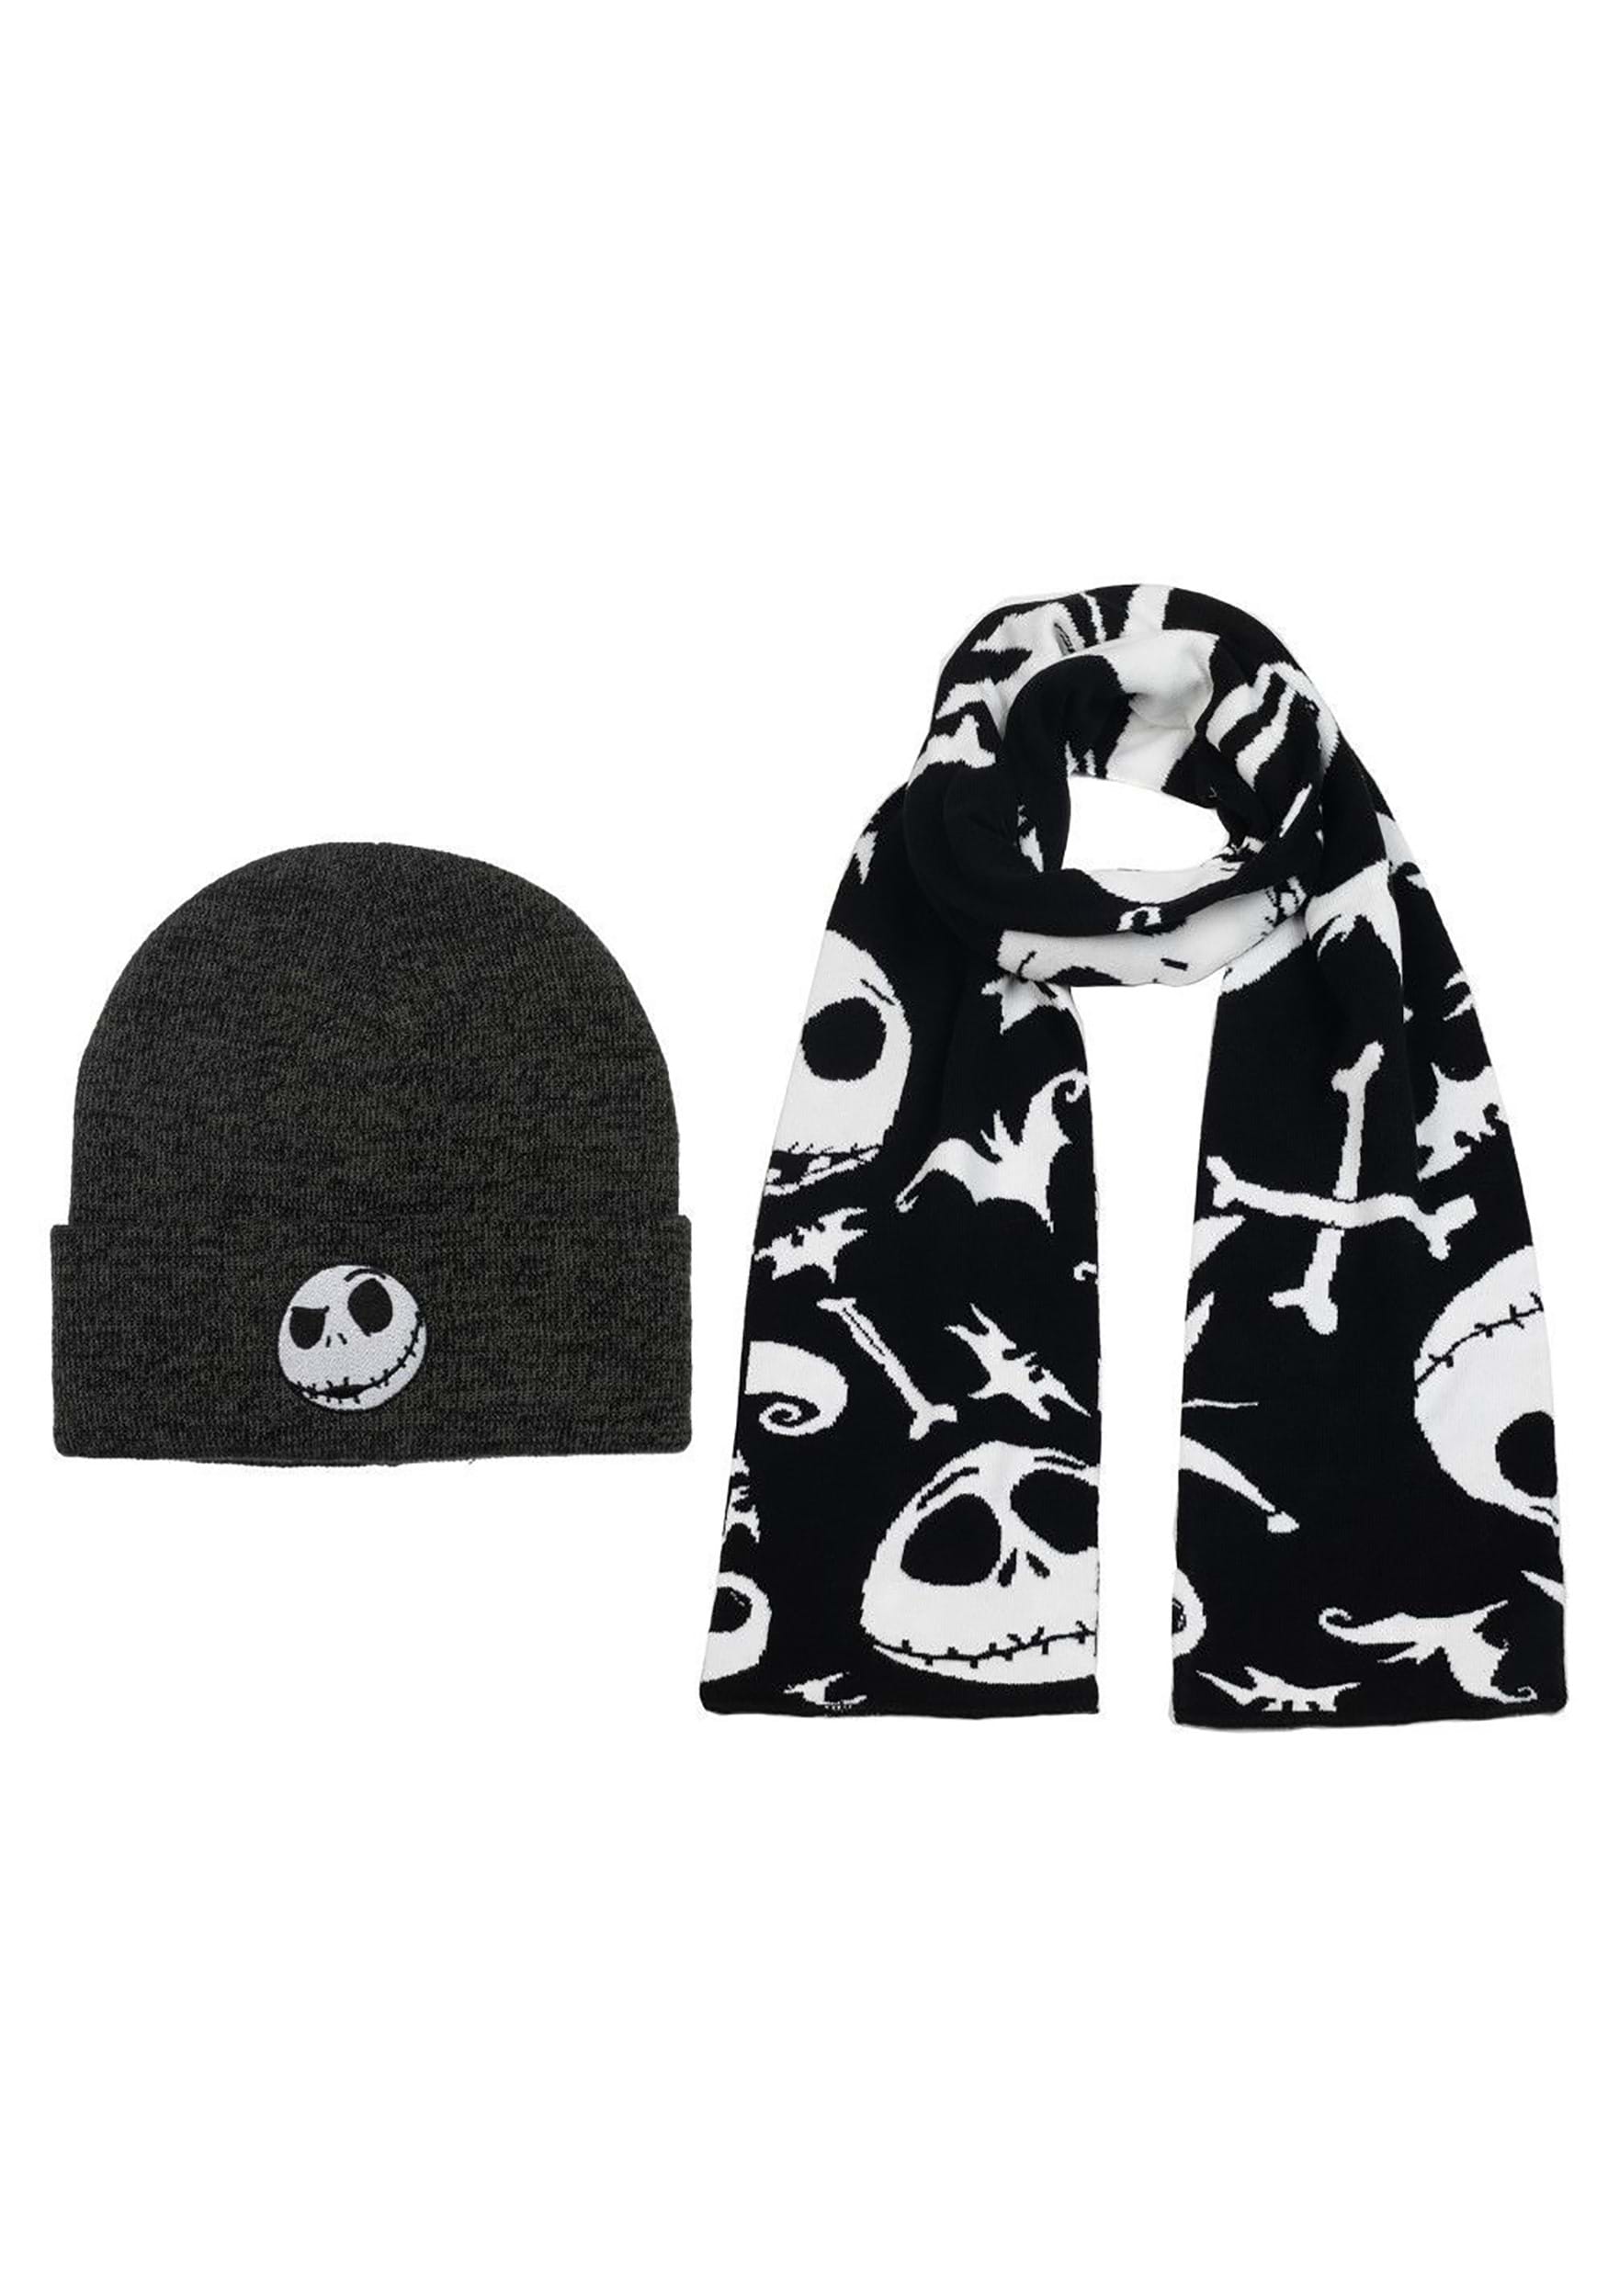 Nightmare Before Christmas Jack Skellington Beanie and Scarf Combo